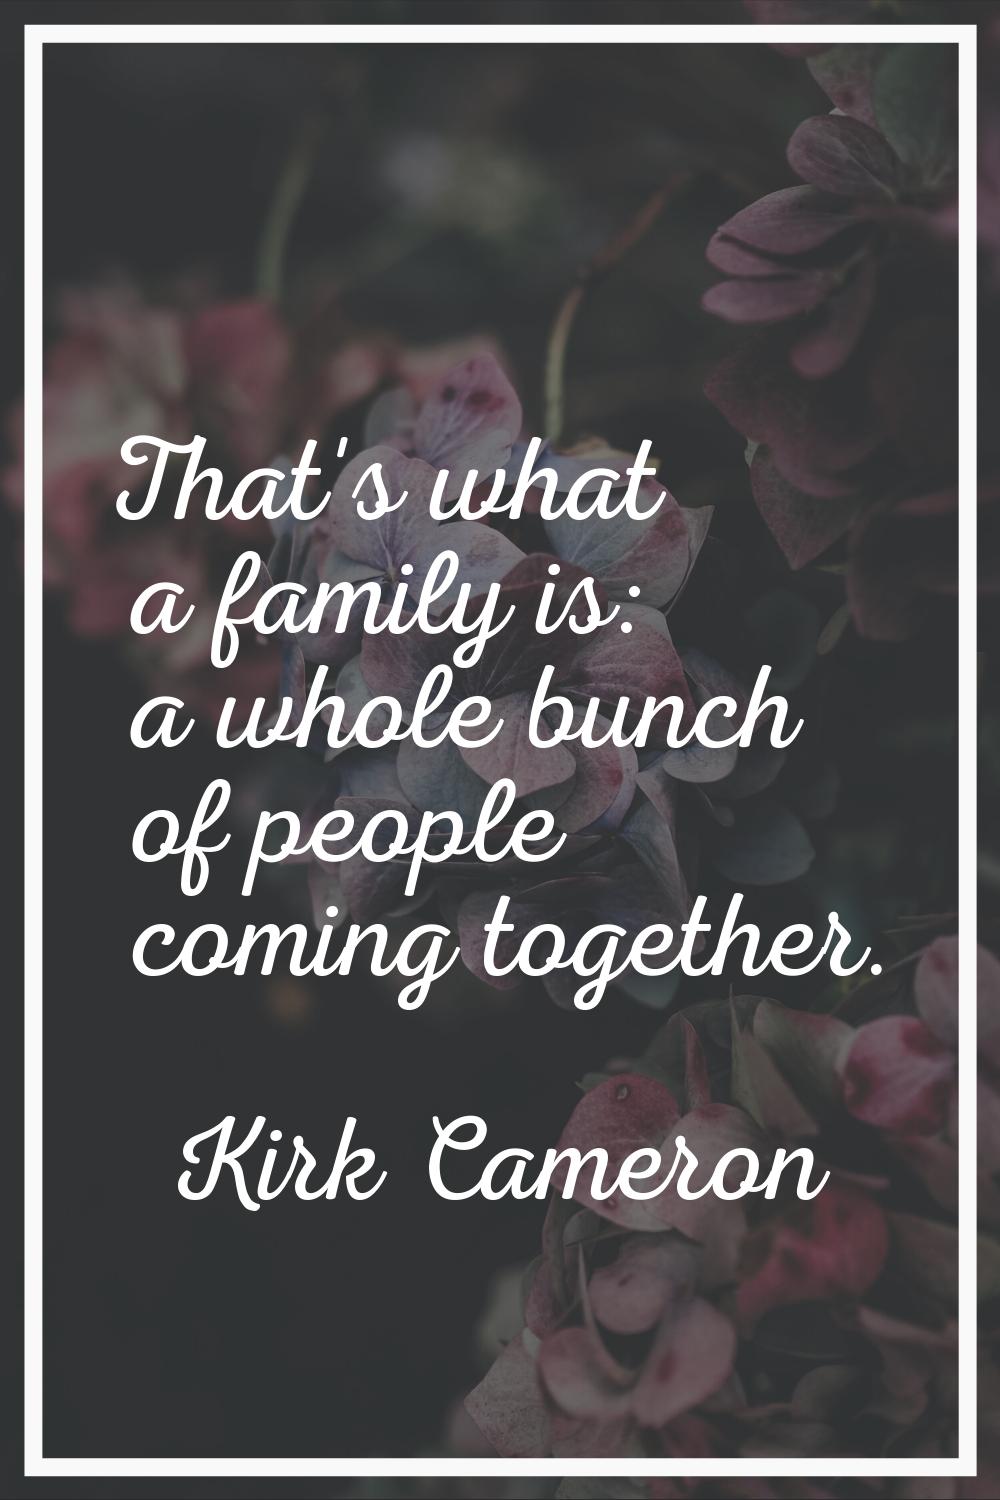 That's what a family is: a whole bunch of people coming together.